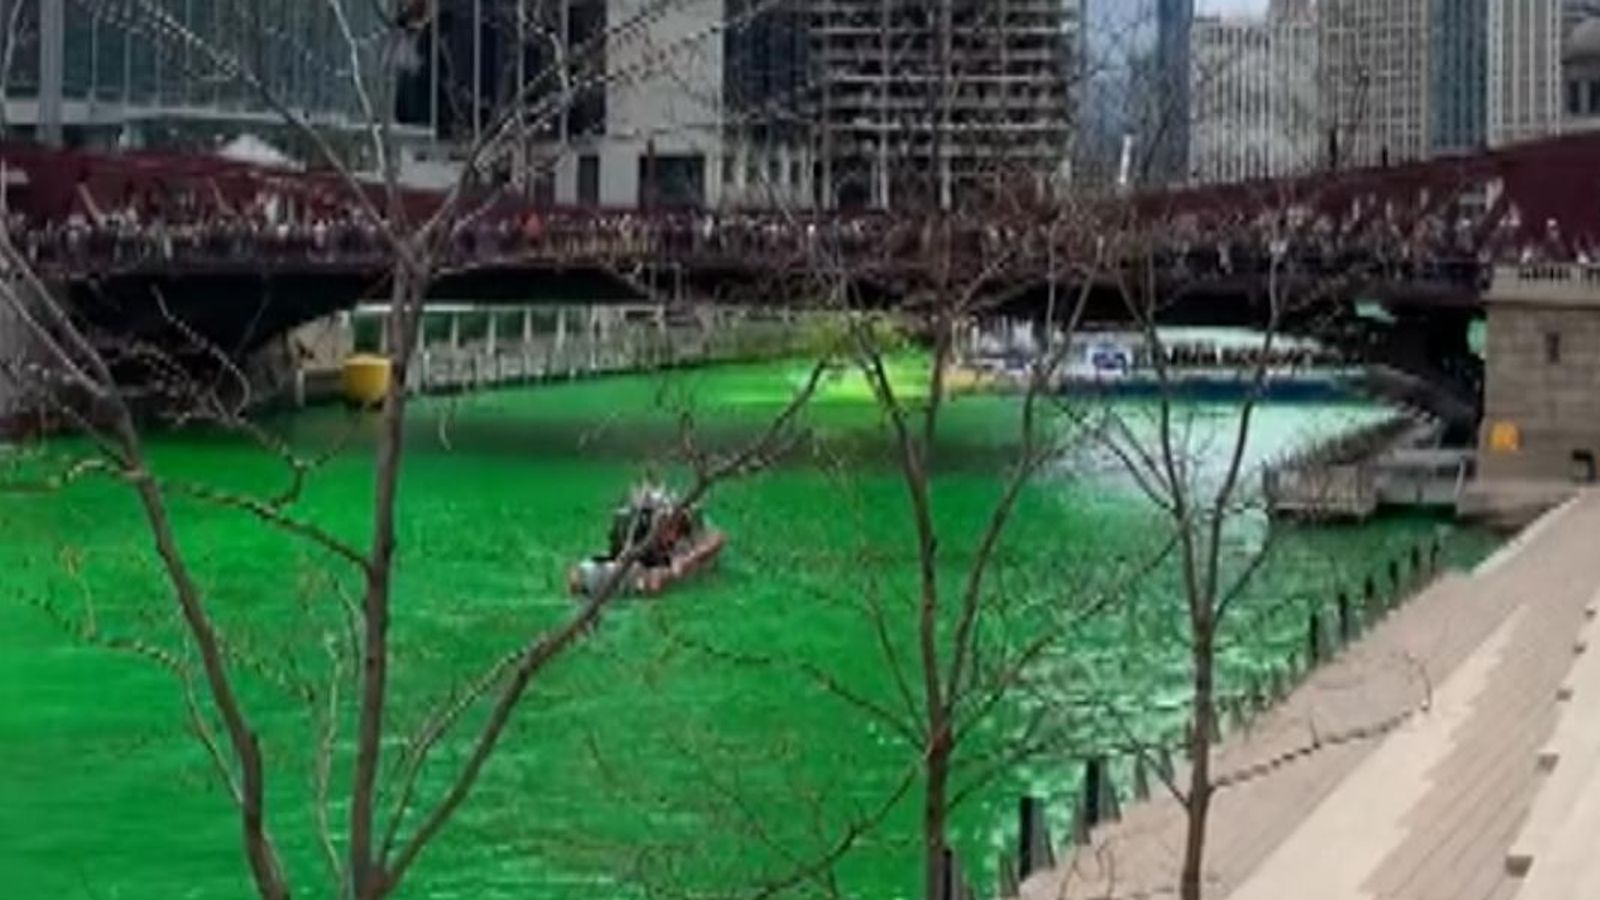 Chicago River dyed green for St. Patrick's Day 